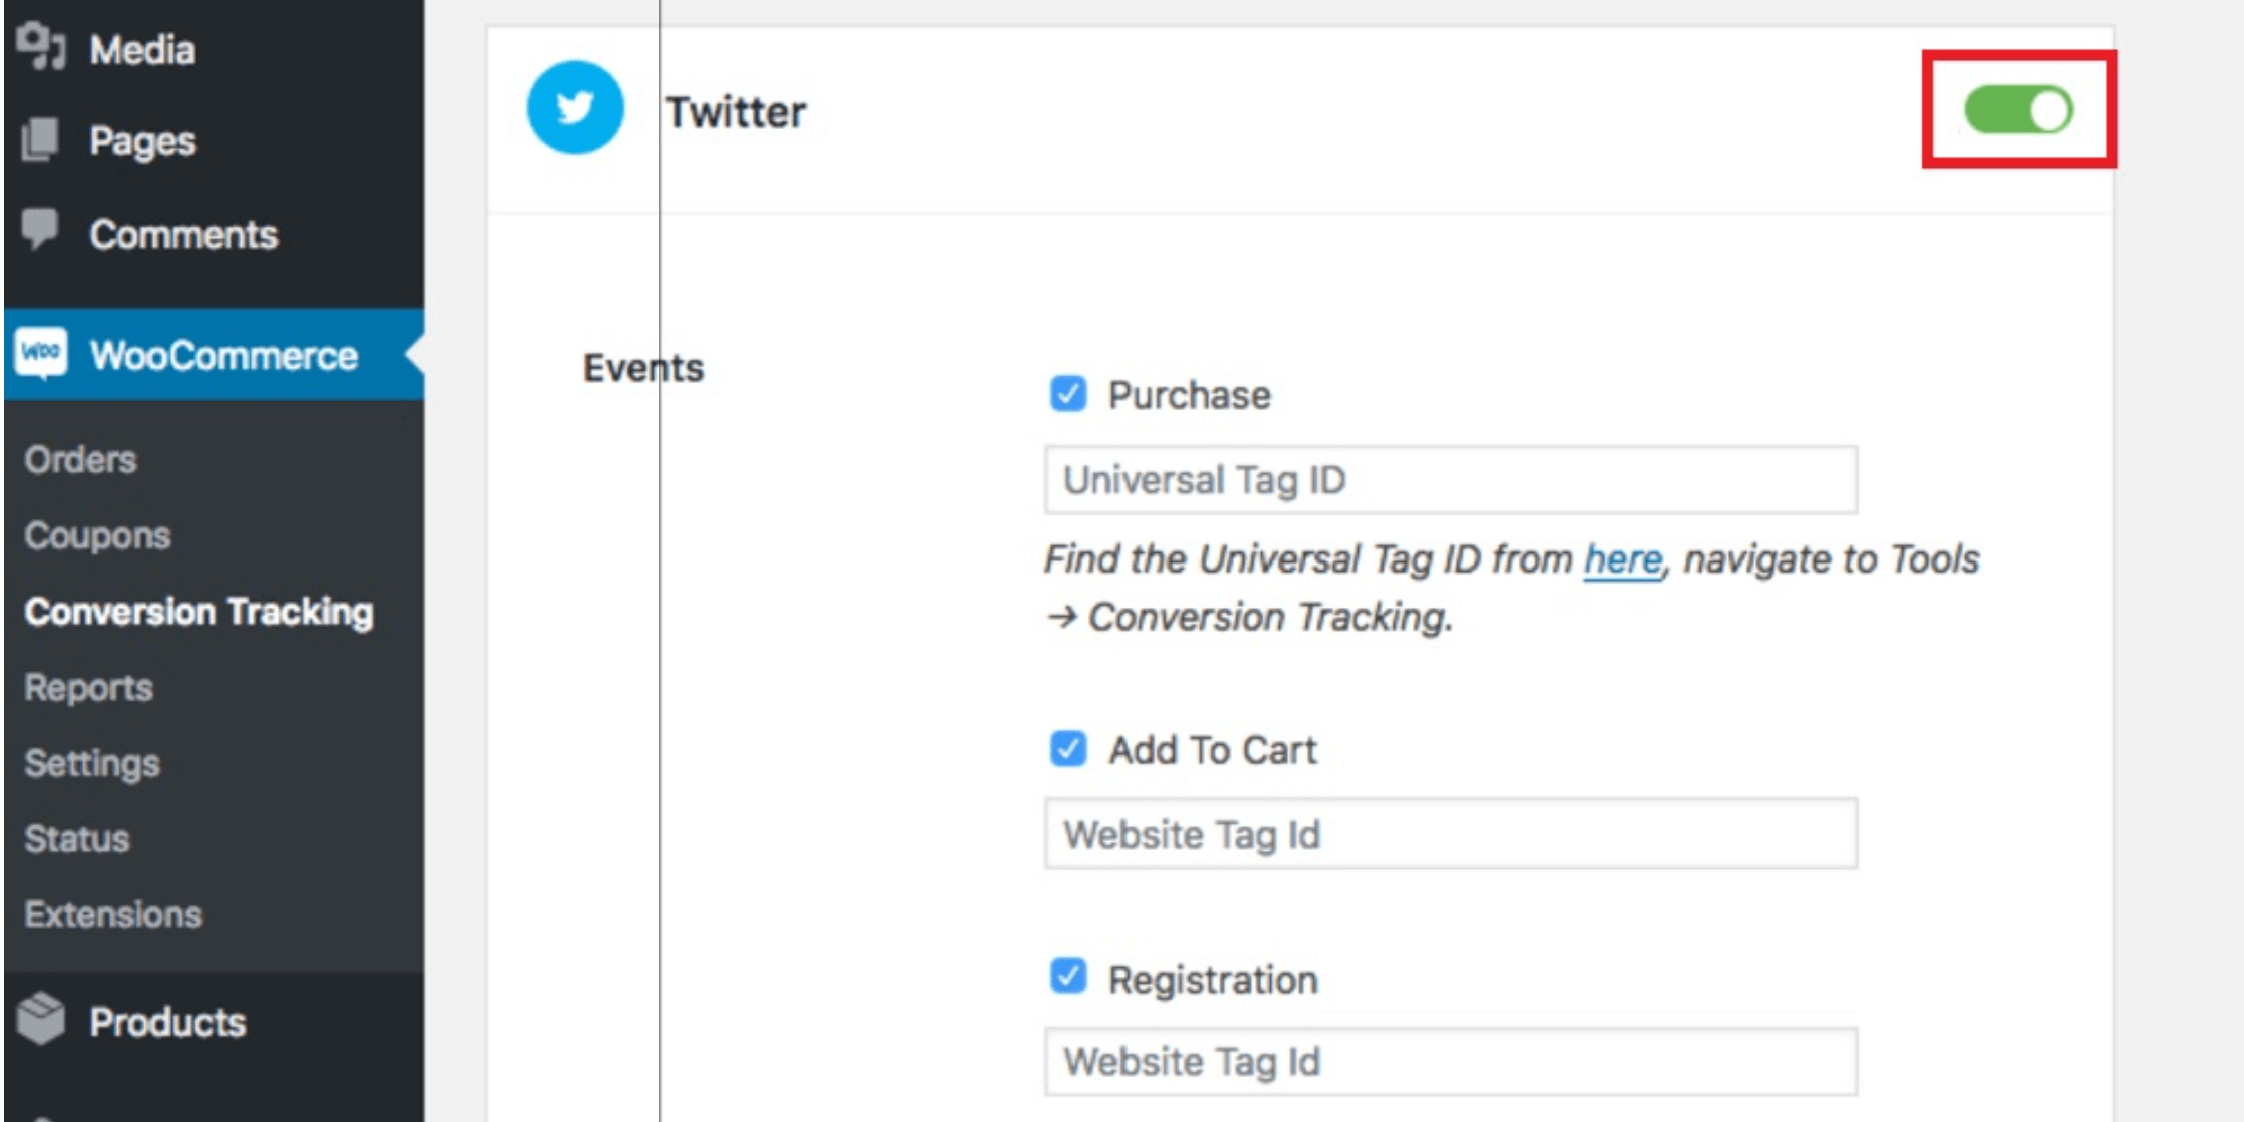 WooCommerce Conversion Tracking twitter settings